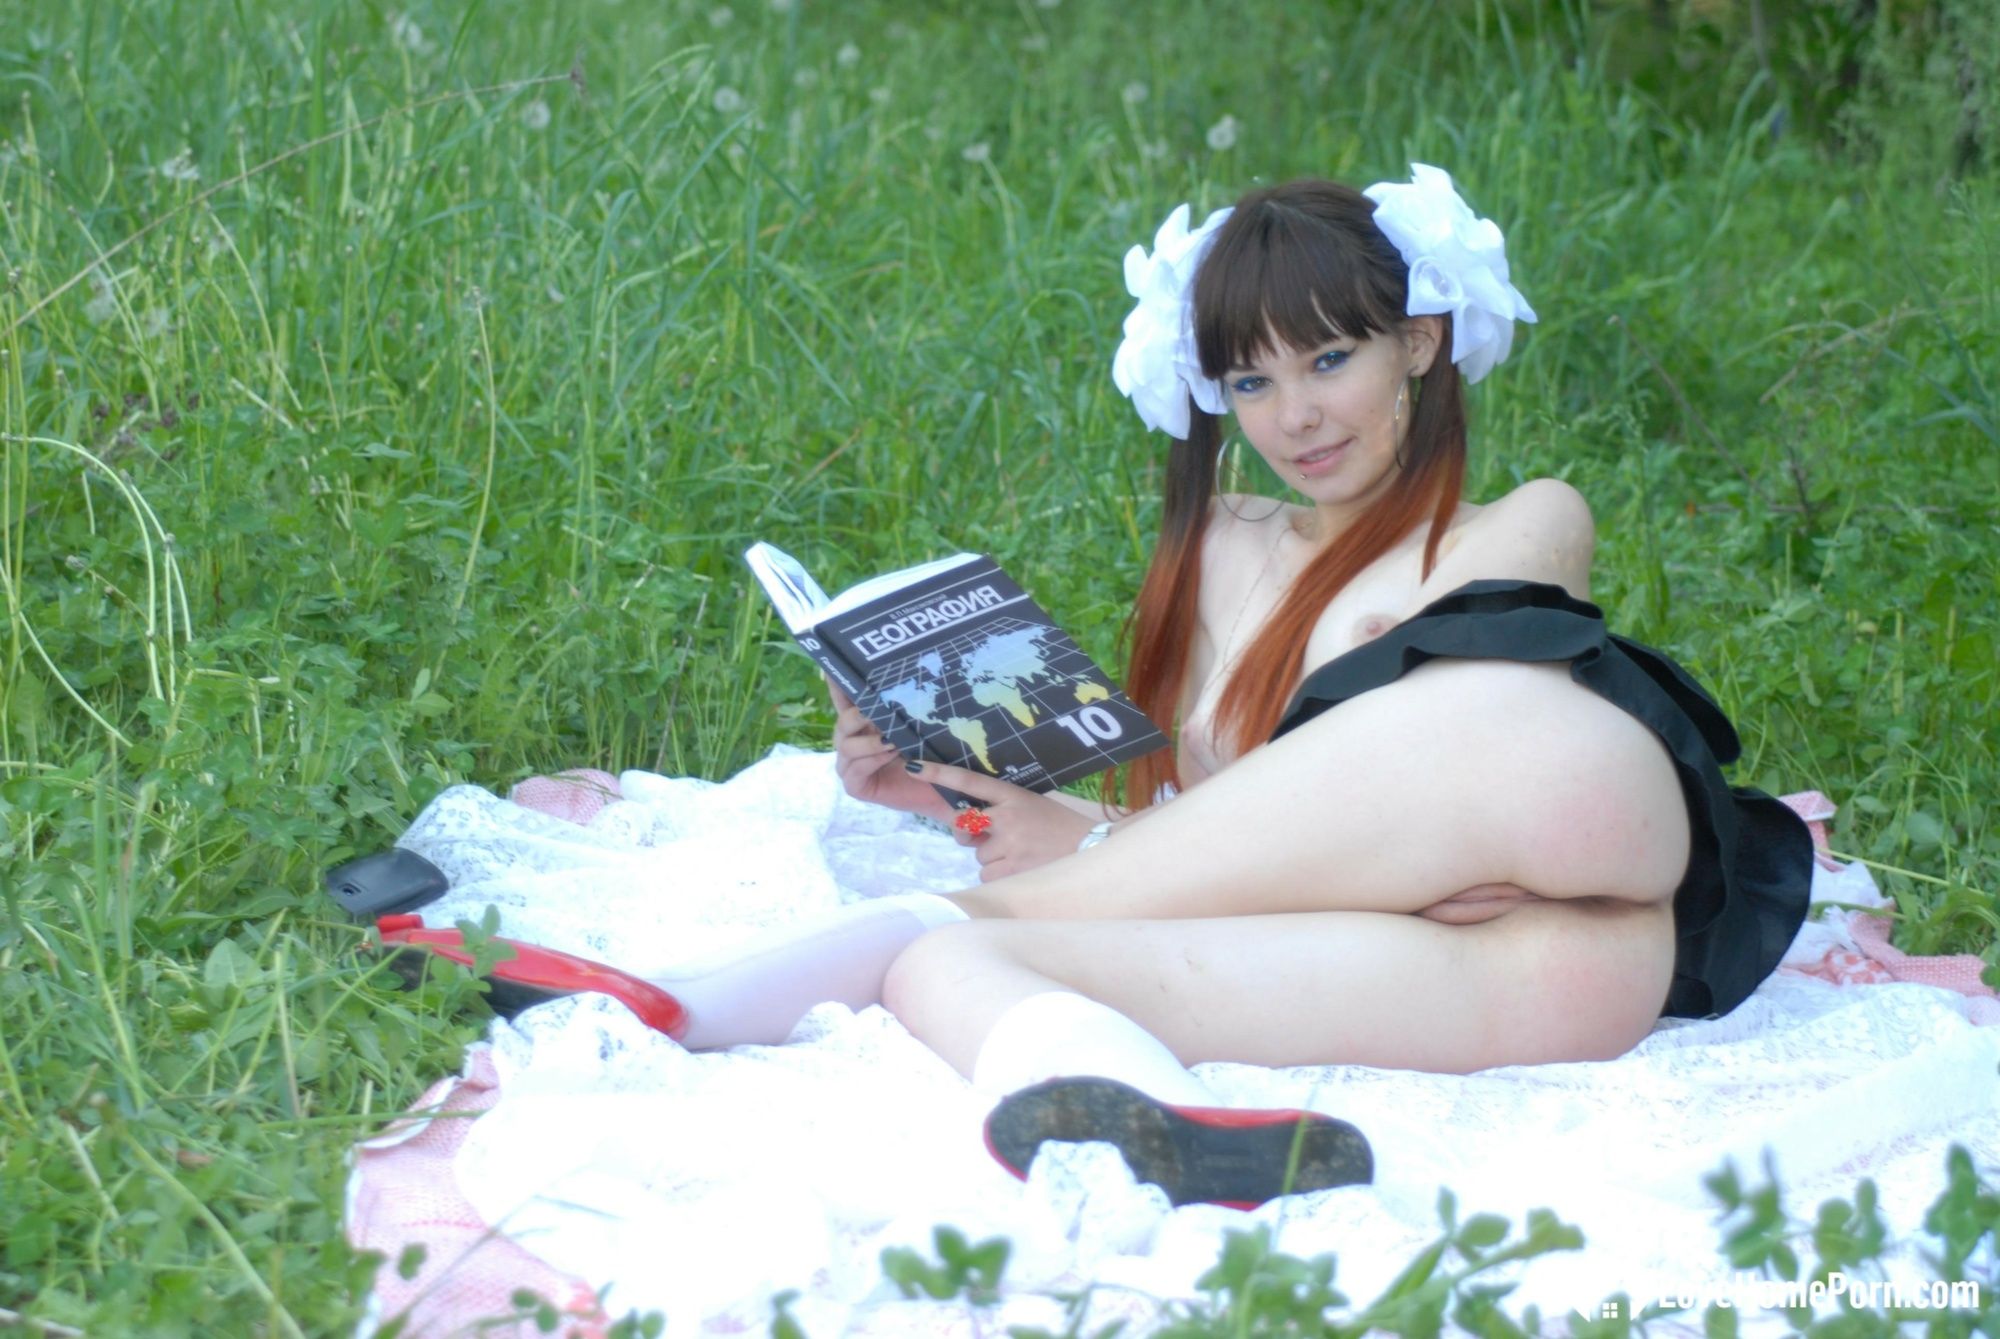 Schoolgirl turns a picnic into a teasing session #4